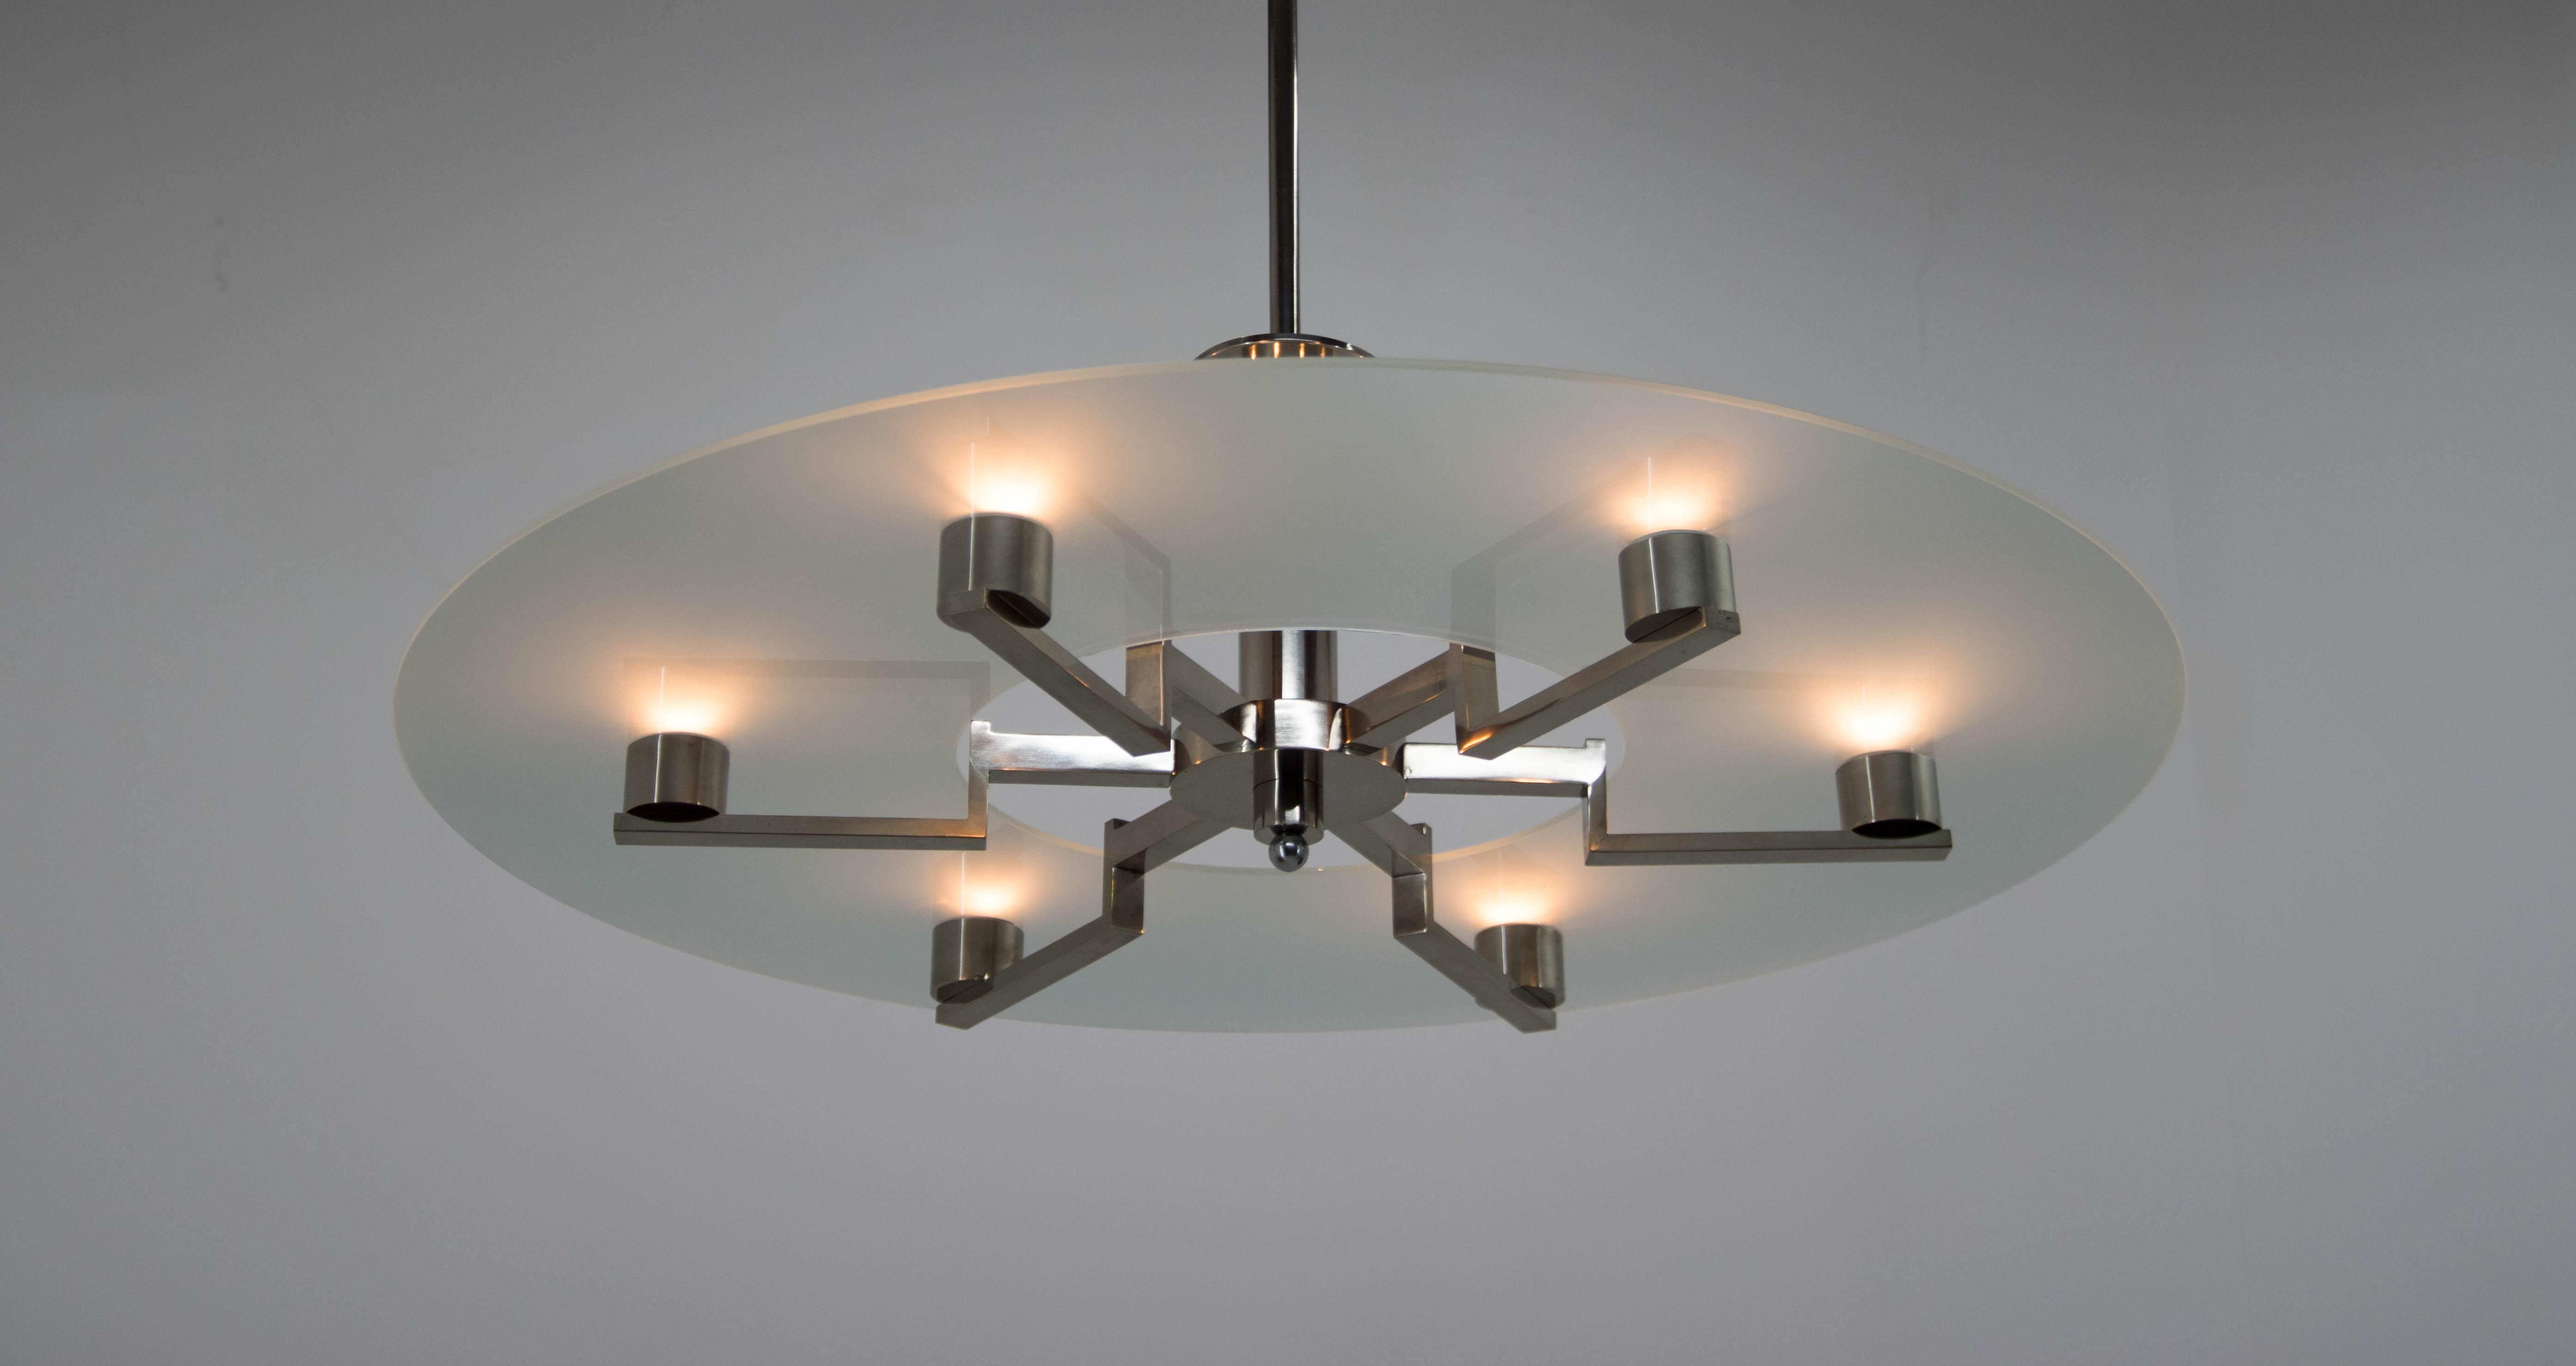 Magnificent Bauhaus or functionalist chandelier.
Timeless design with simple and clean lines.
Original nickel polished.
New sandblasted glass
Rewired - two separate circuits: 3+3x40W, E25-E27 bulbs
US wiring compatible.